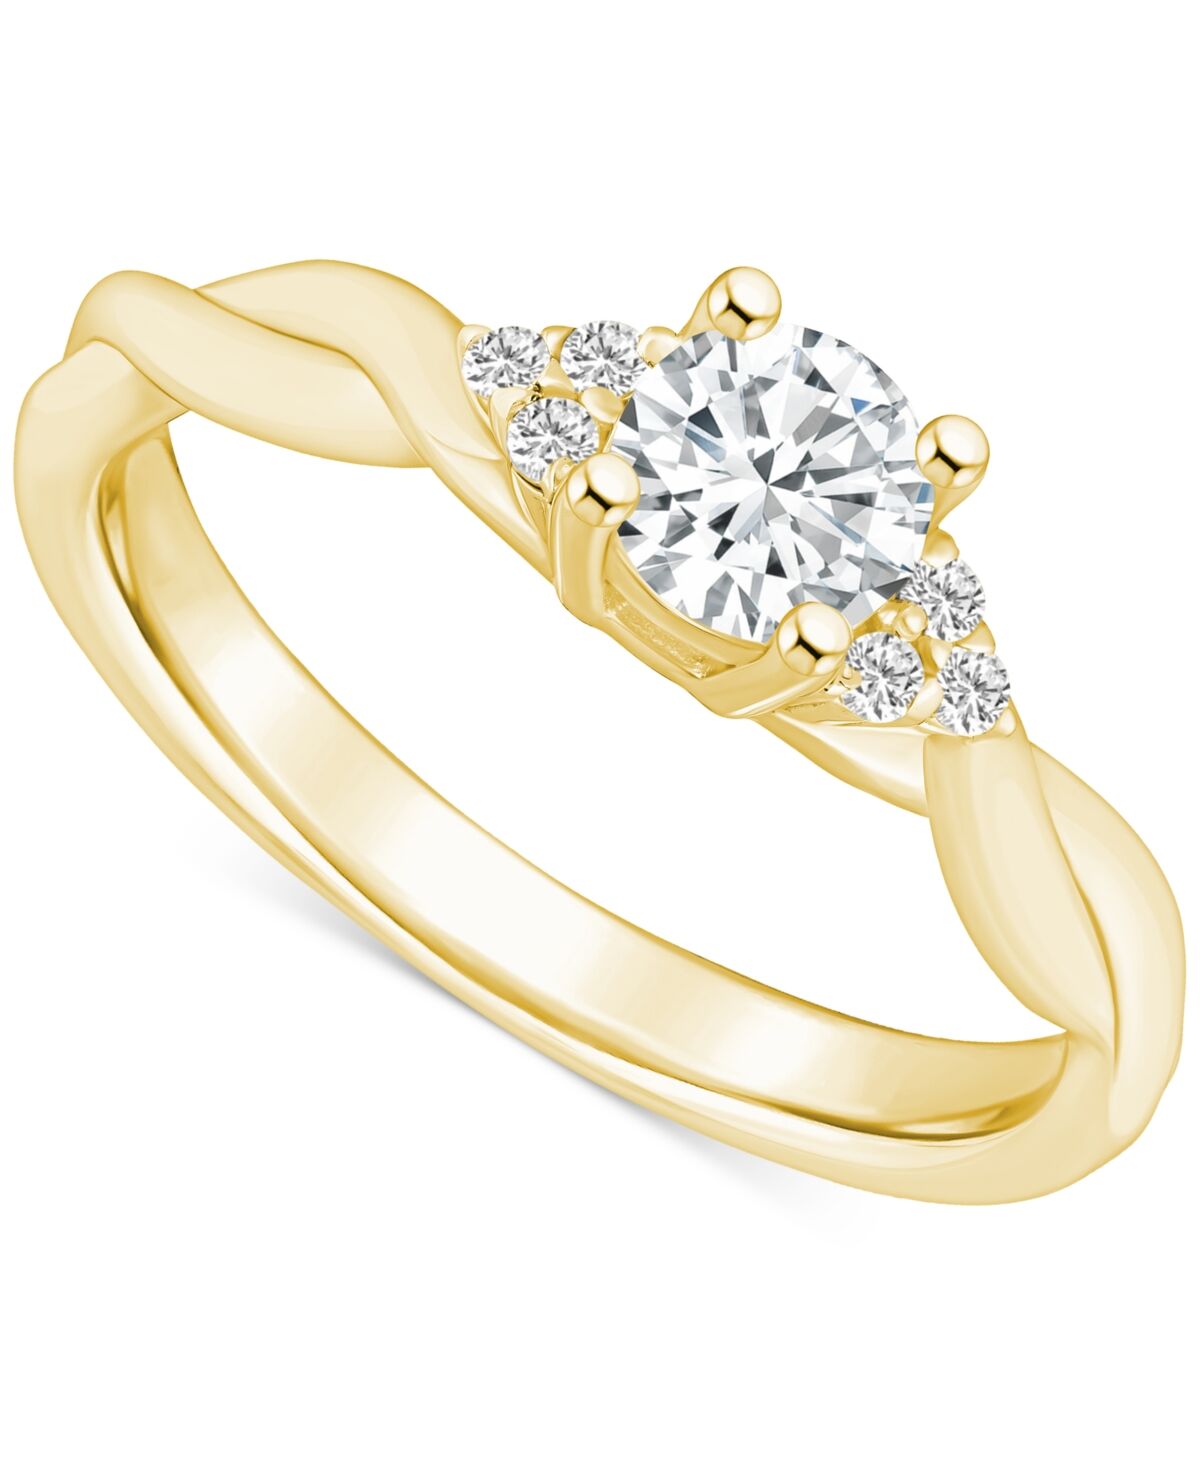 Macy's Diamond Twist Engagement Ring (1/2 ct. t.w.) in 14k White, Yellow or Rose Gold - Yellow Gold